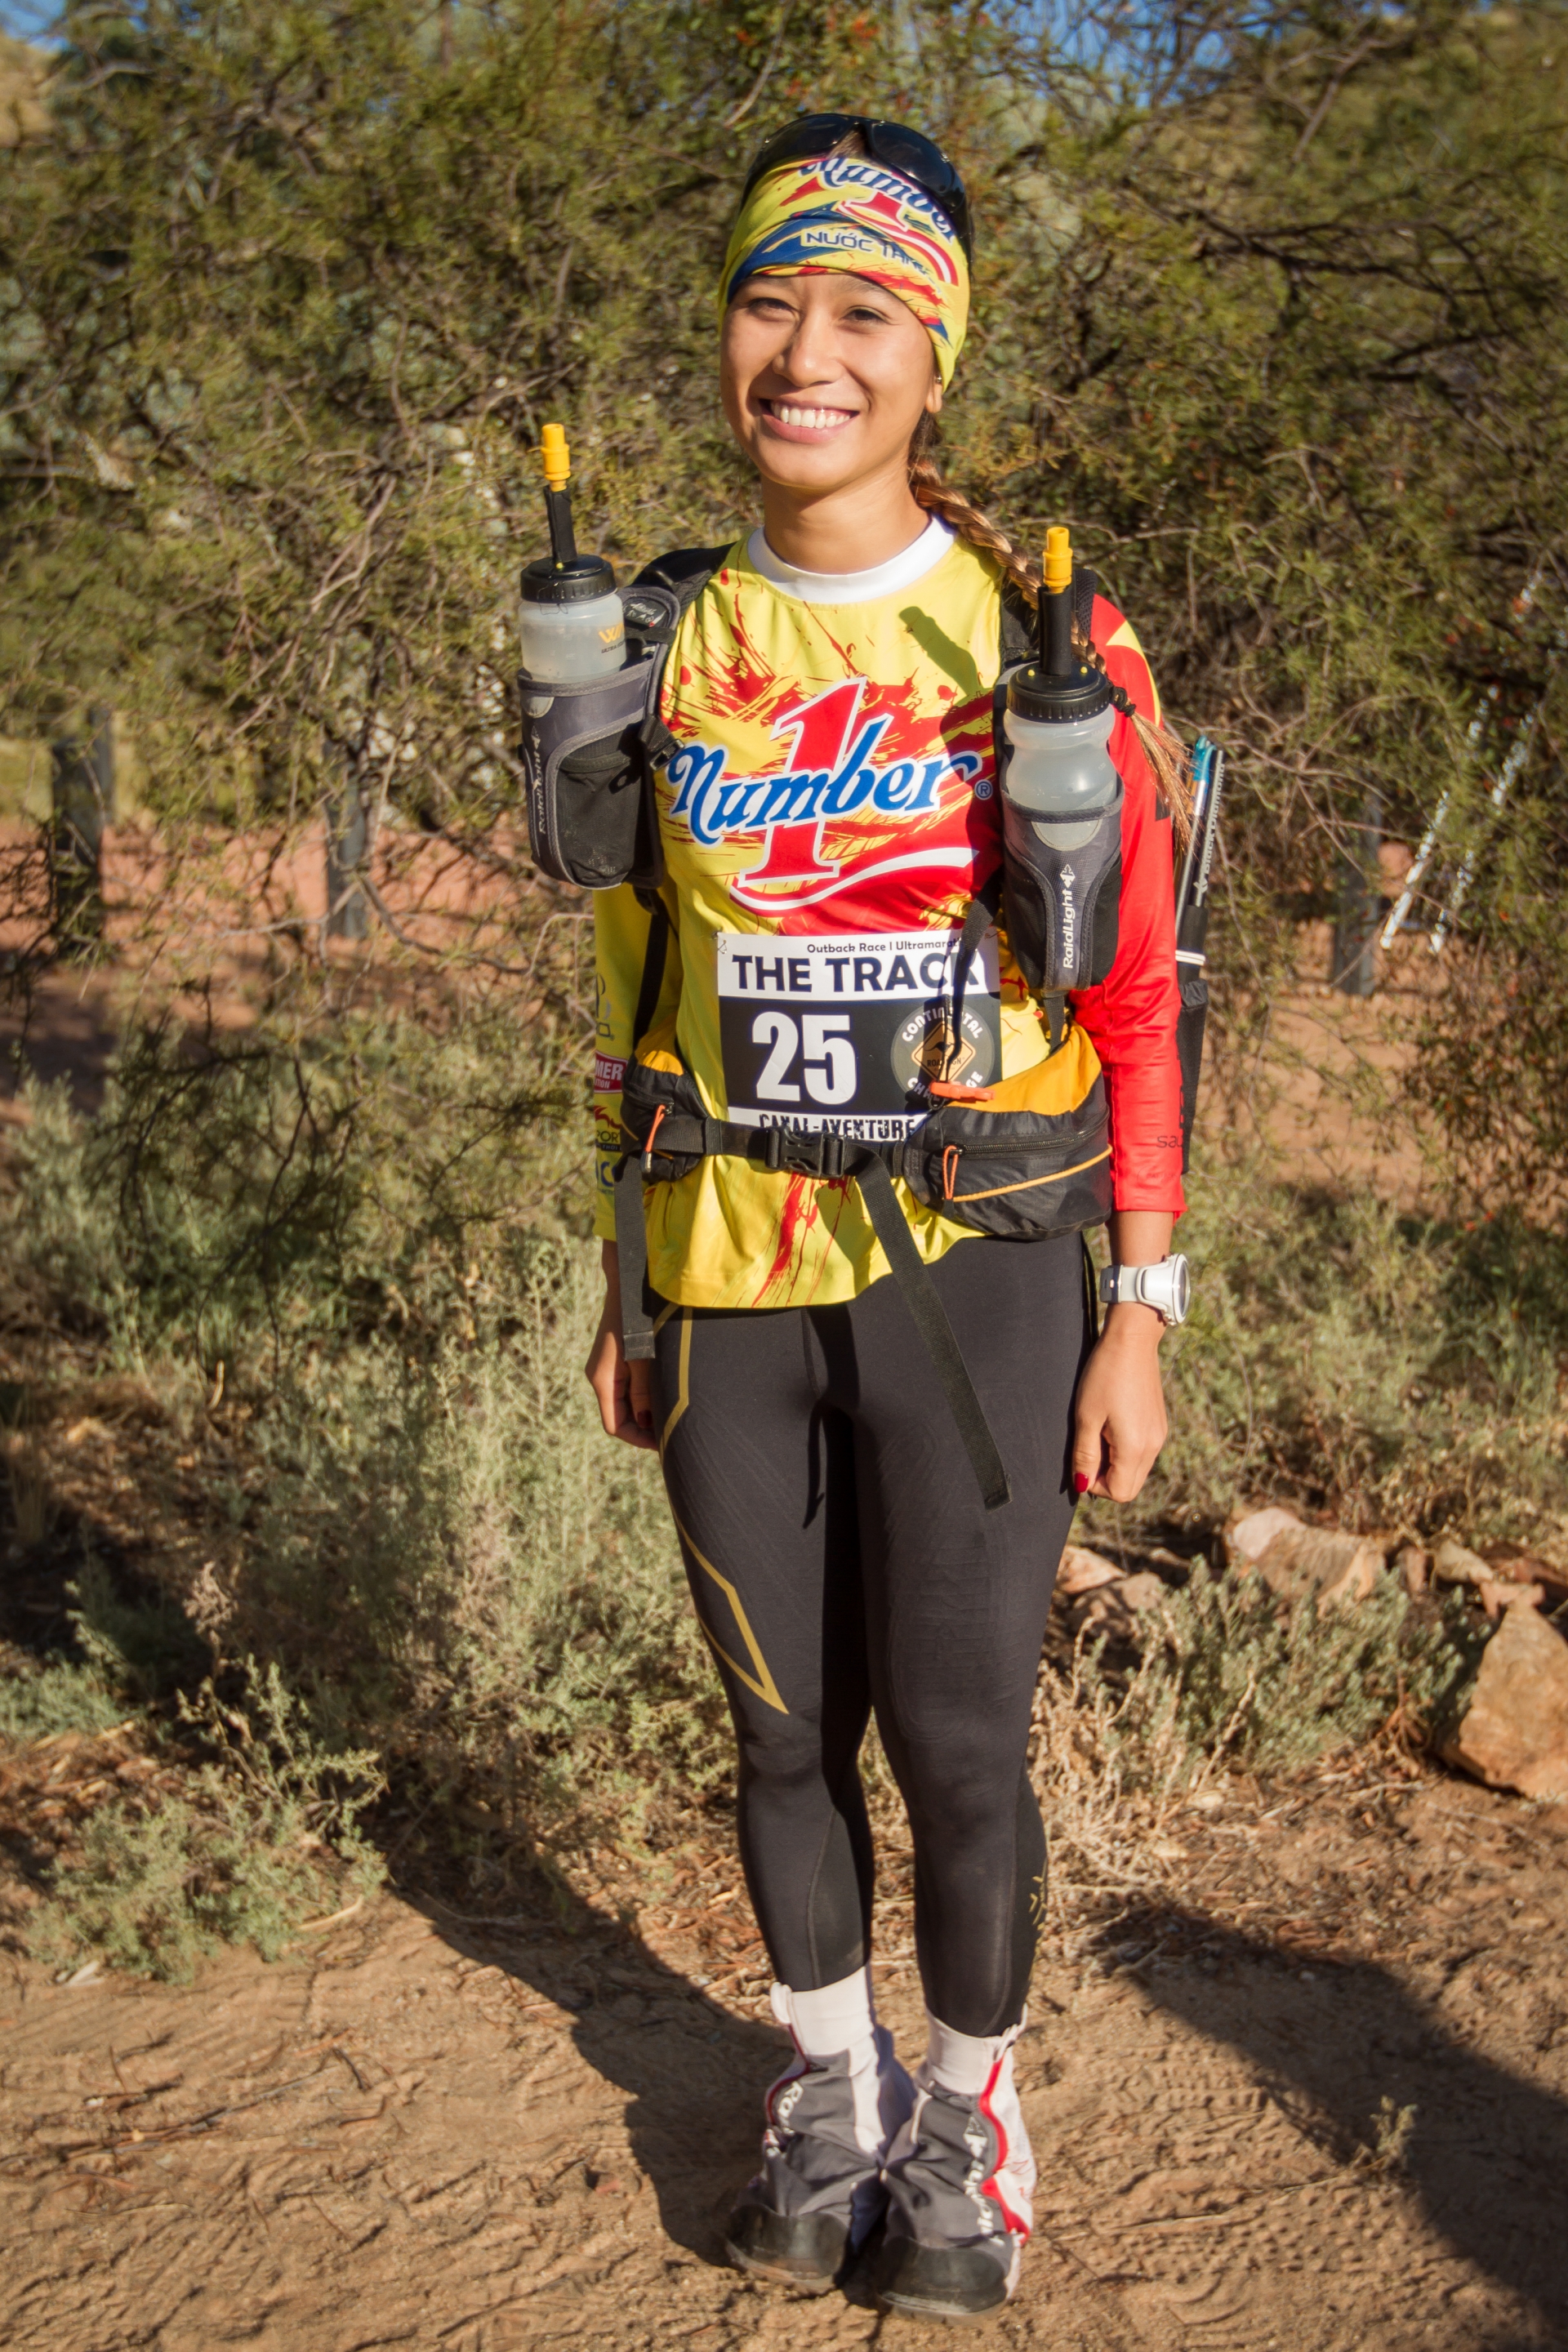 determination makes champions says young adventurer vu phuong thanh